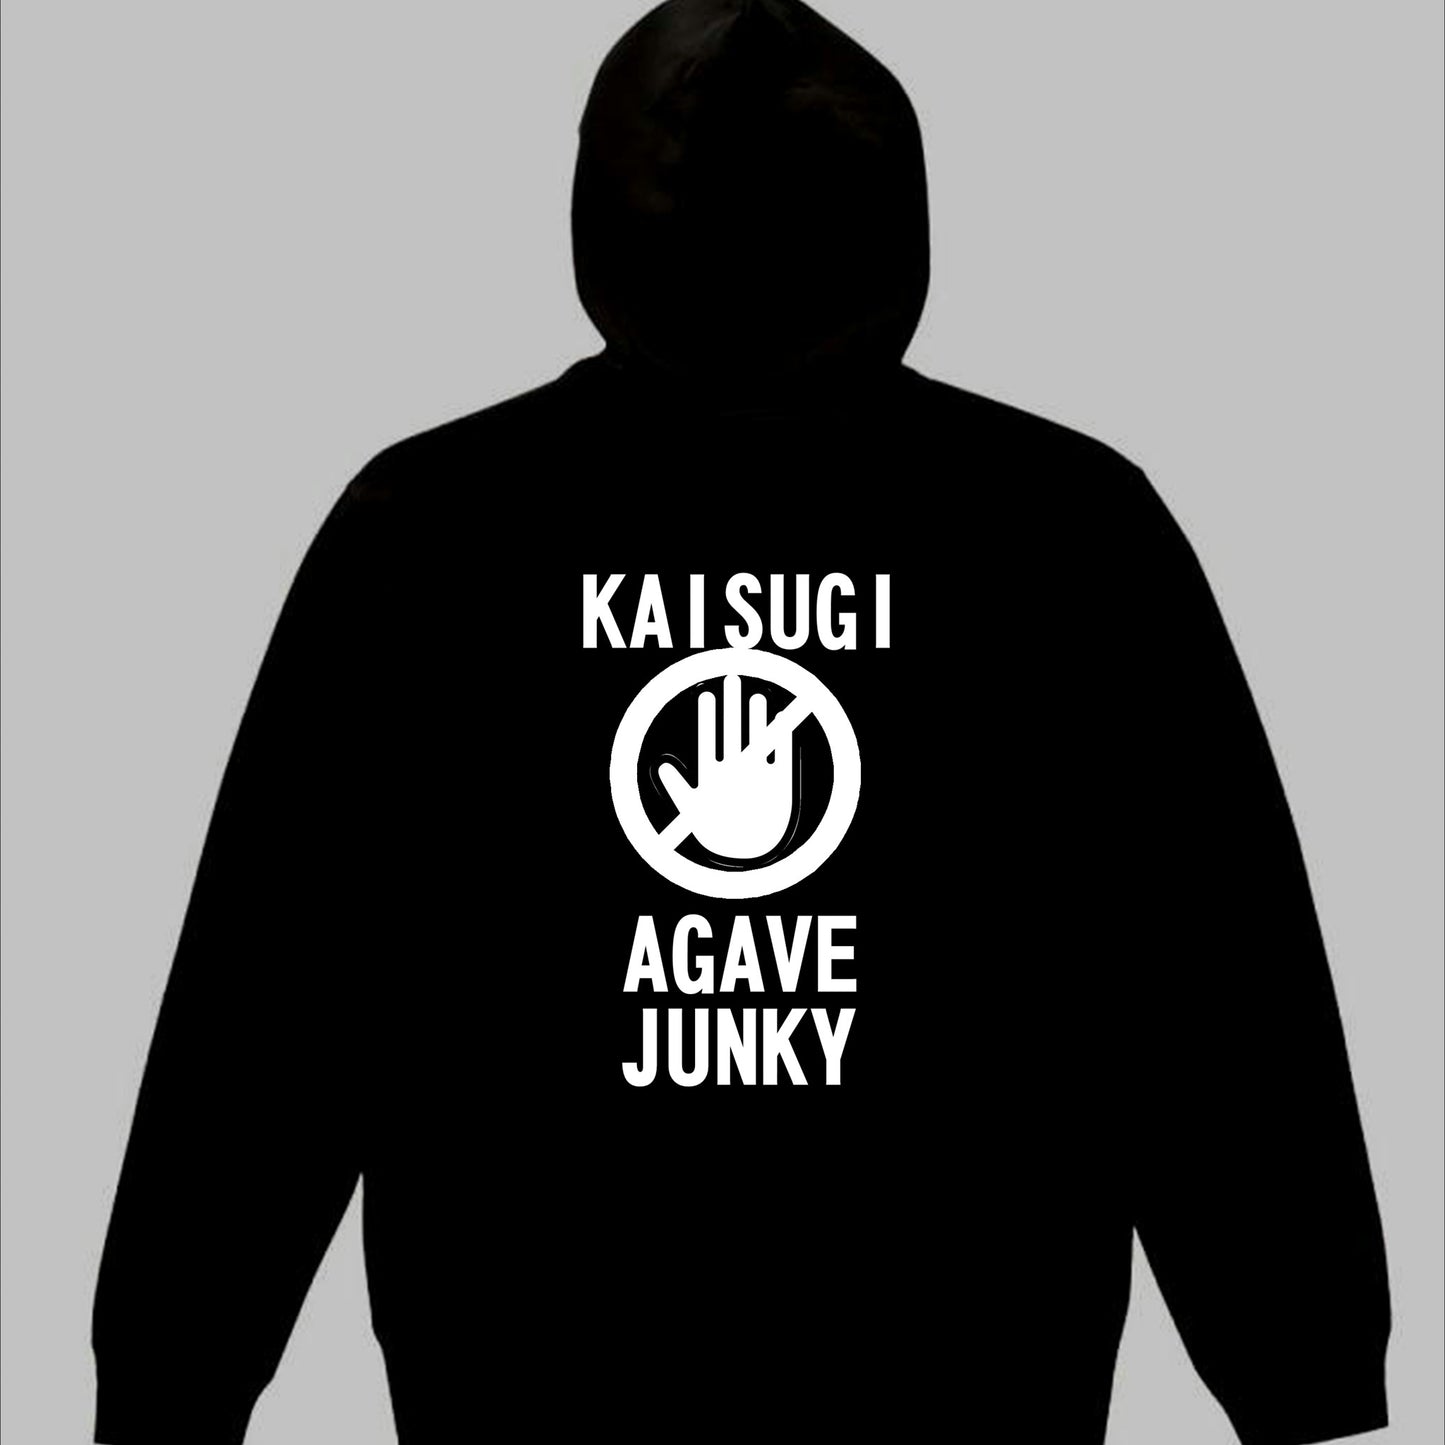 KAISUGI AGAVE JUNKY パーカー S～XL